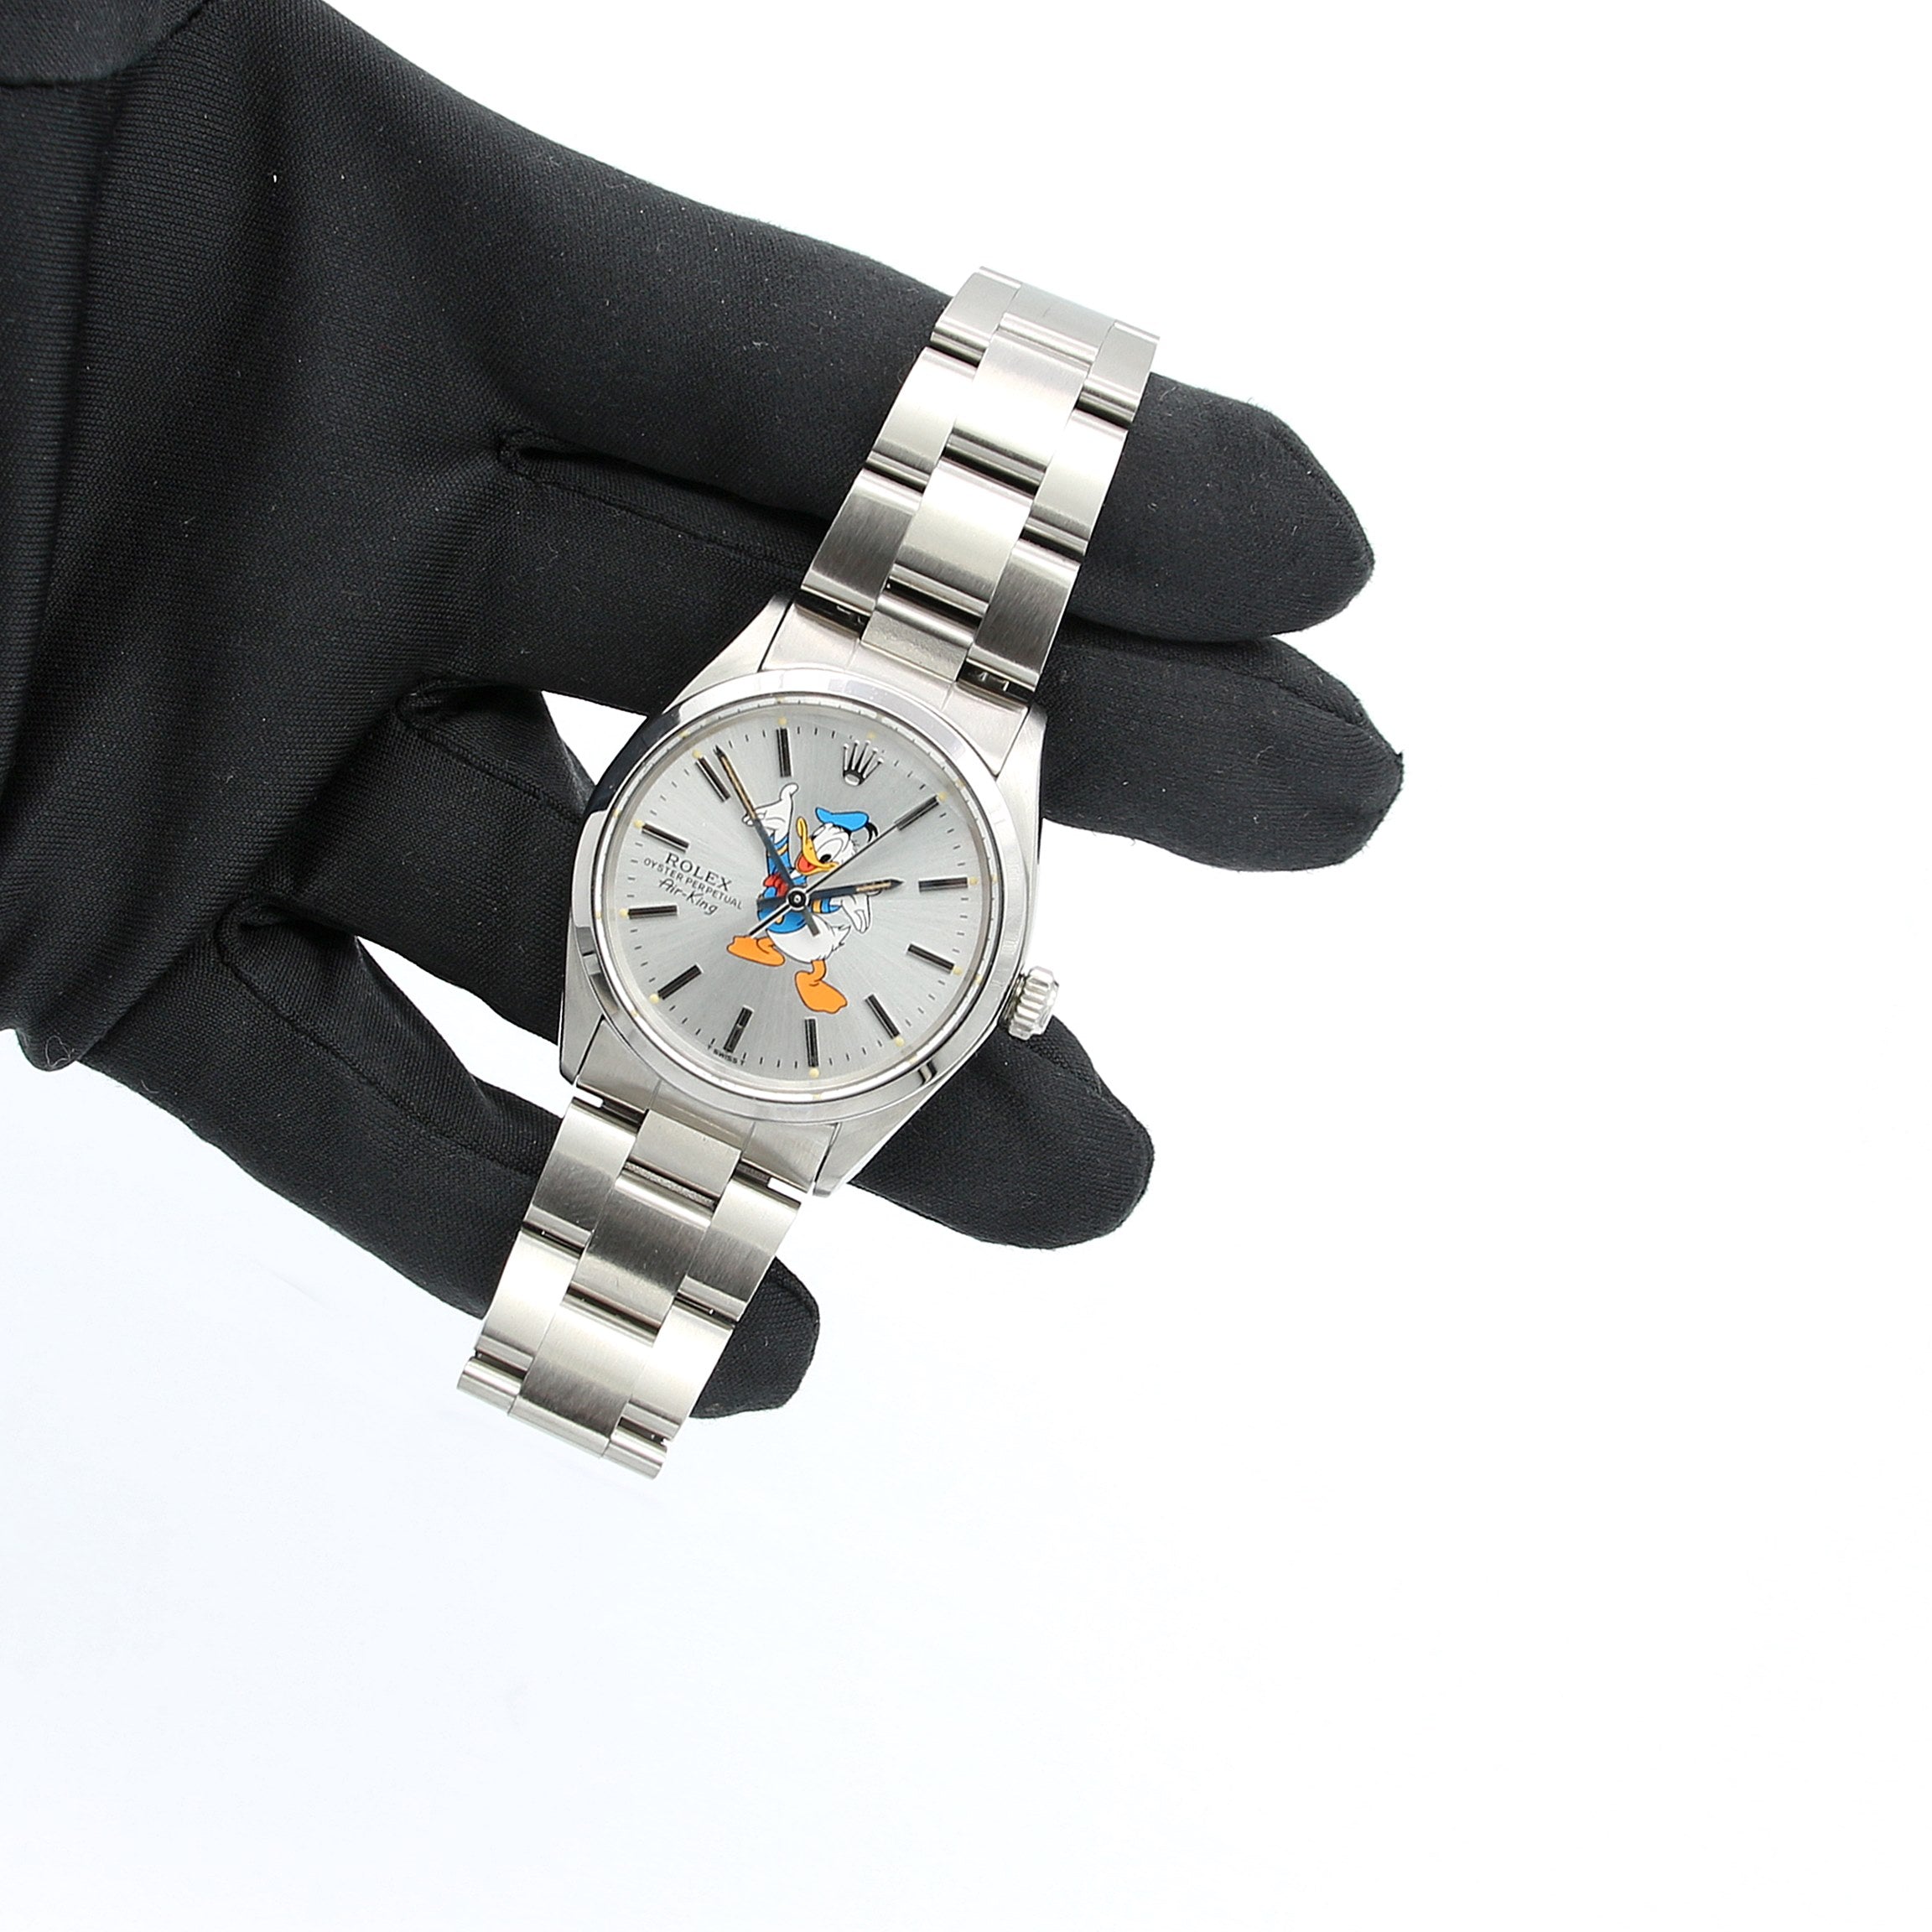 Rolex Air-King ref. 5500 Donald Duck Dial (Hands up/Happy)